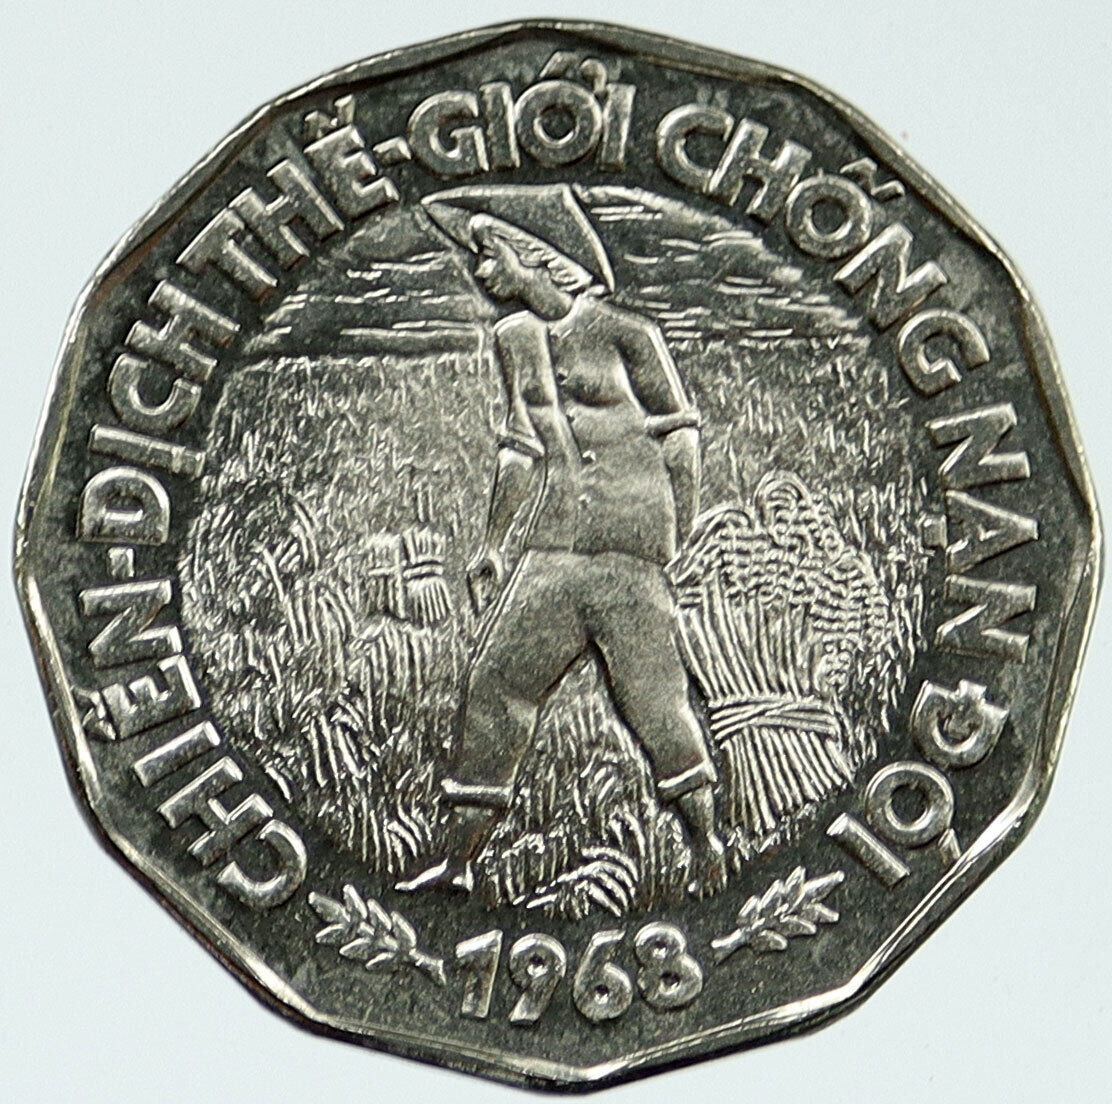 1968 SOUTH VIETNAM Commemorative FAO Food Rice Paddy 20 Dong Coin i117293